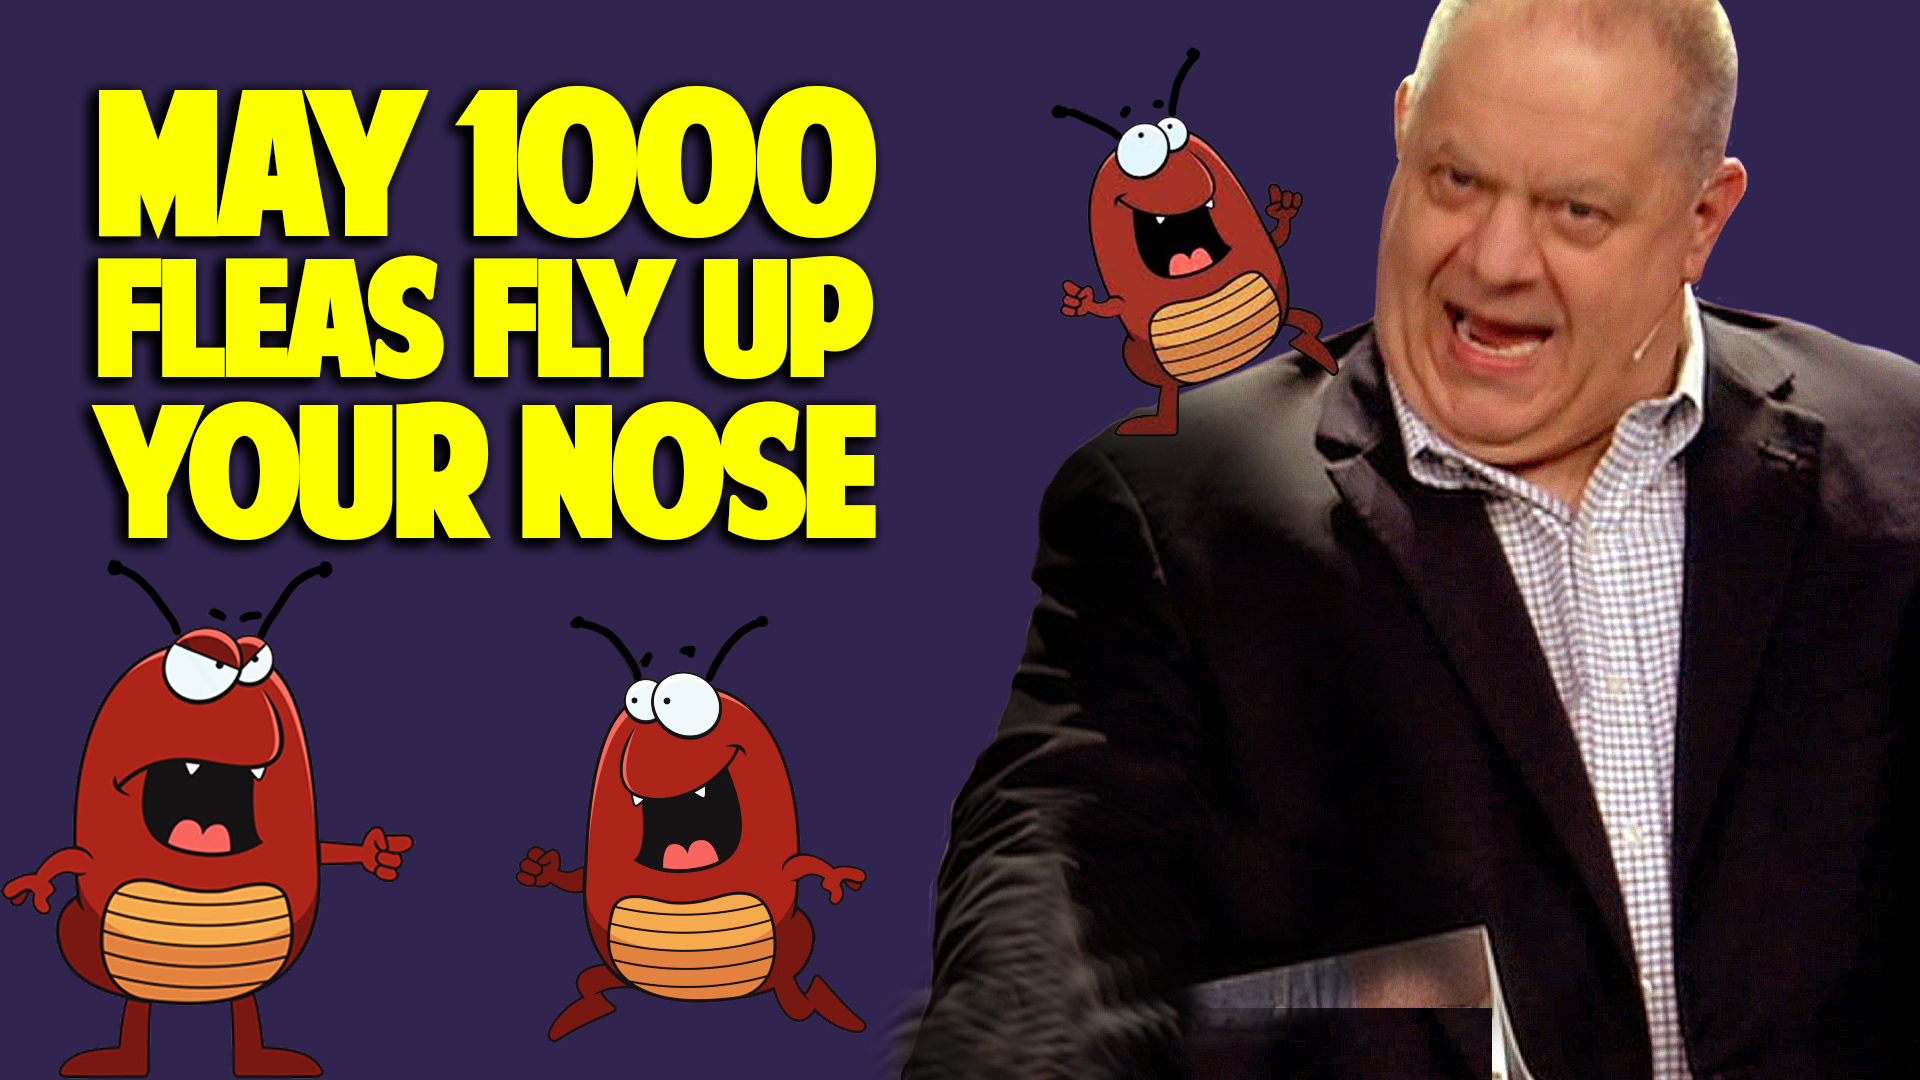 Friday Funny – 1000 Fleas Up Your Nose